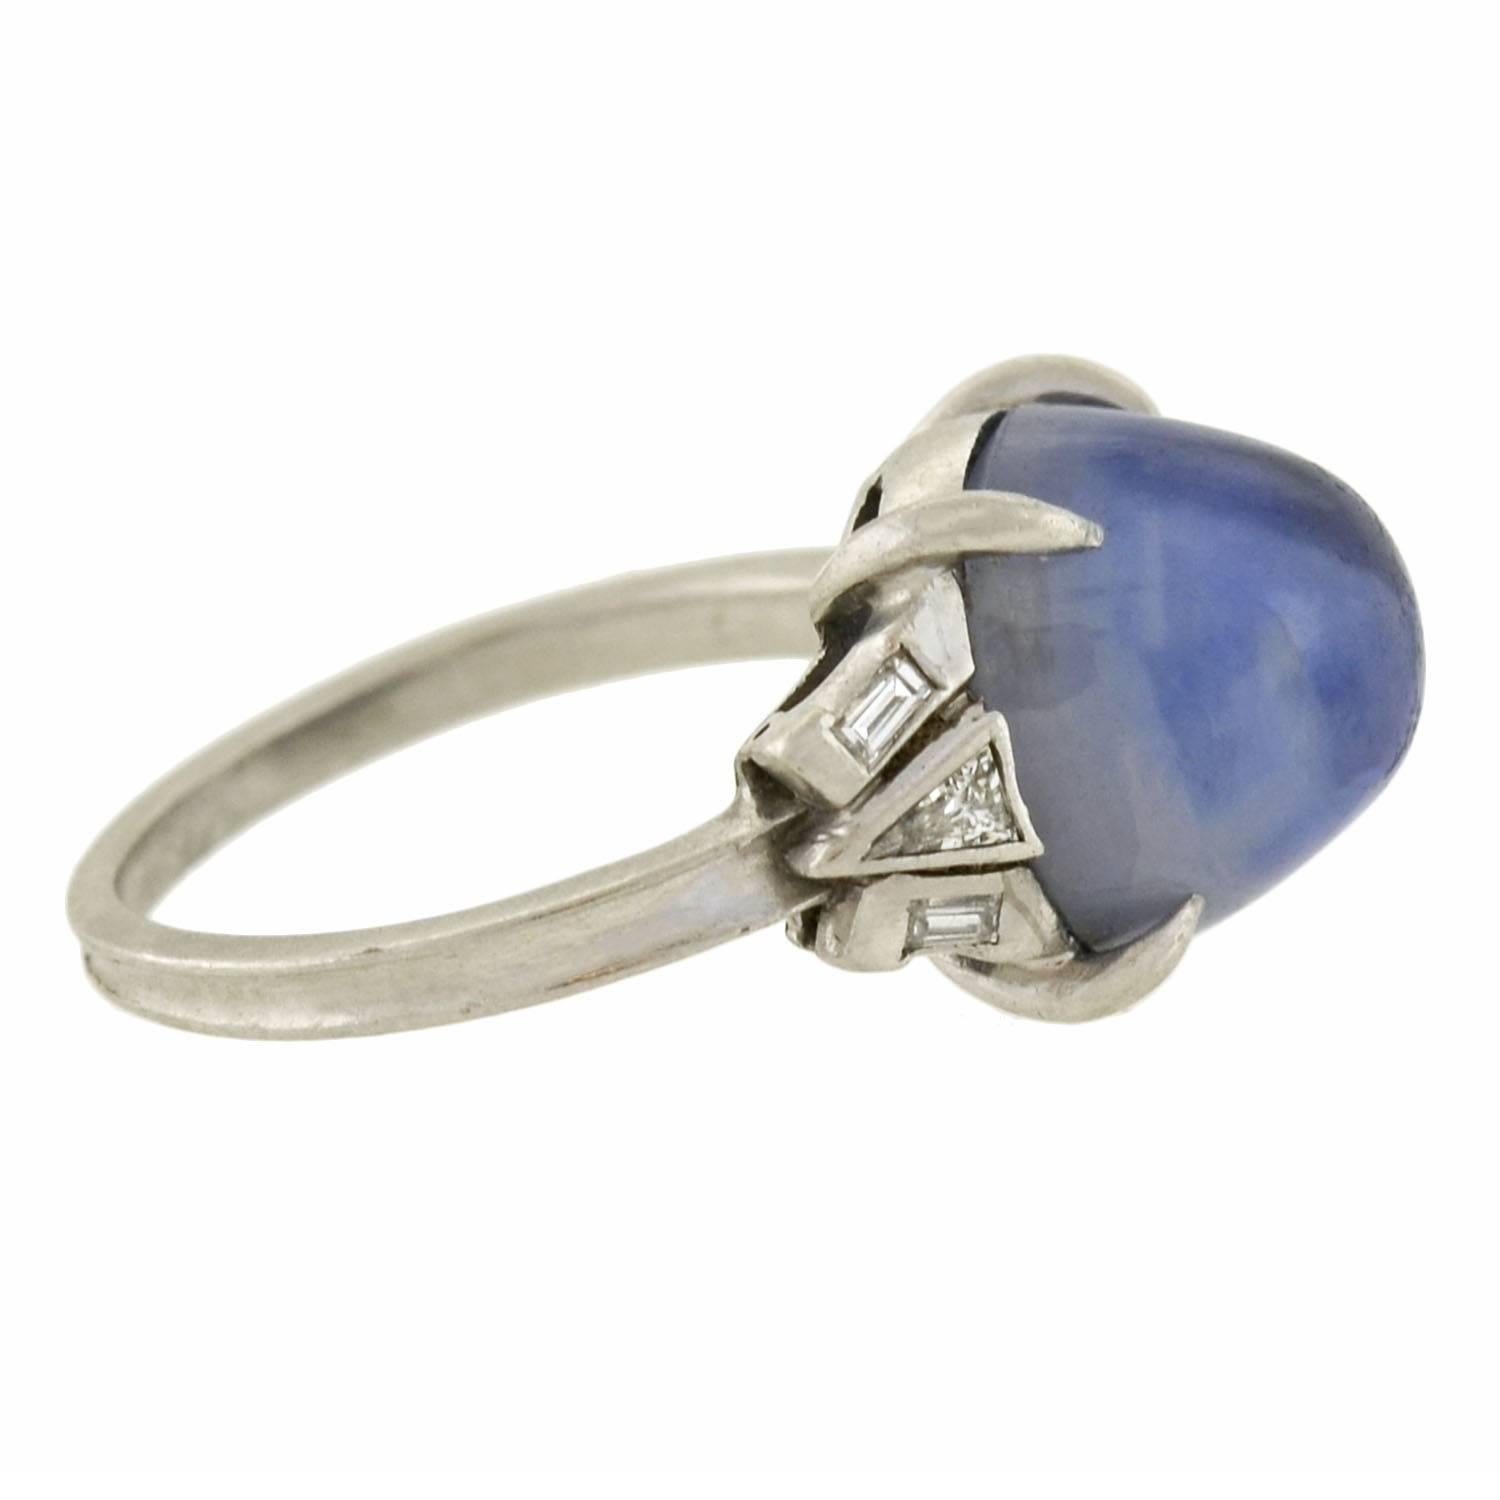 A simply stunning sapphire and diamond ring from the late Art Deco (ca1930) era! This fantastic platinum piece adorns an incredible natural star sapphire cabochon at the center of a gorgeous setting. The stone weighs approximately 4.50ctw and